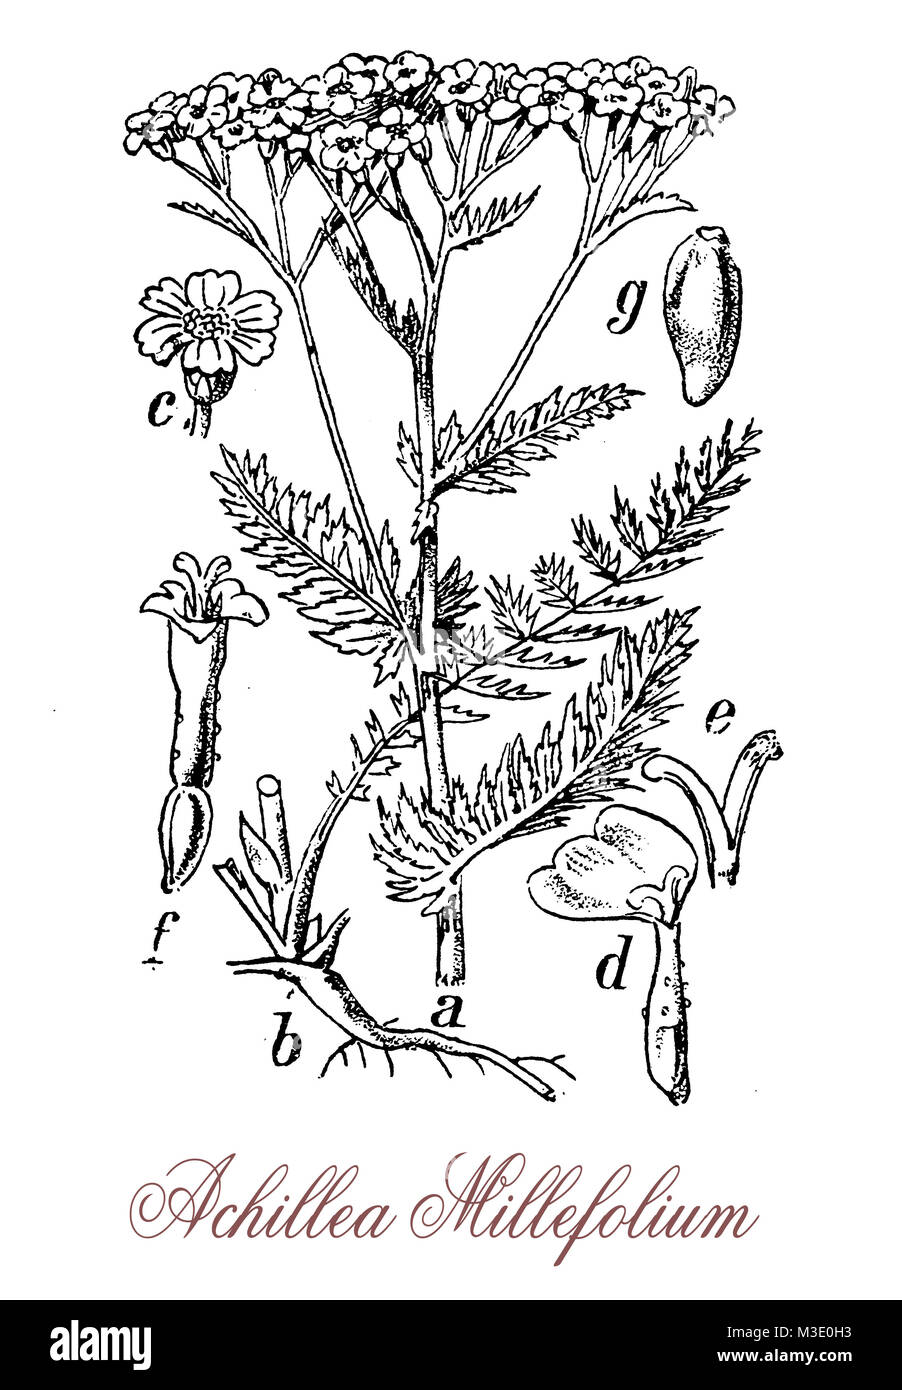 vintage engraving of achillea millefolium or yarrow , flowering plant used in landscaping and in traditional medicine as astringent. Stock Photo